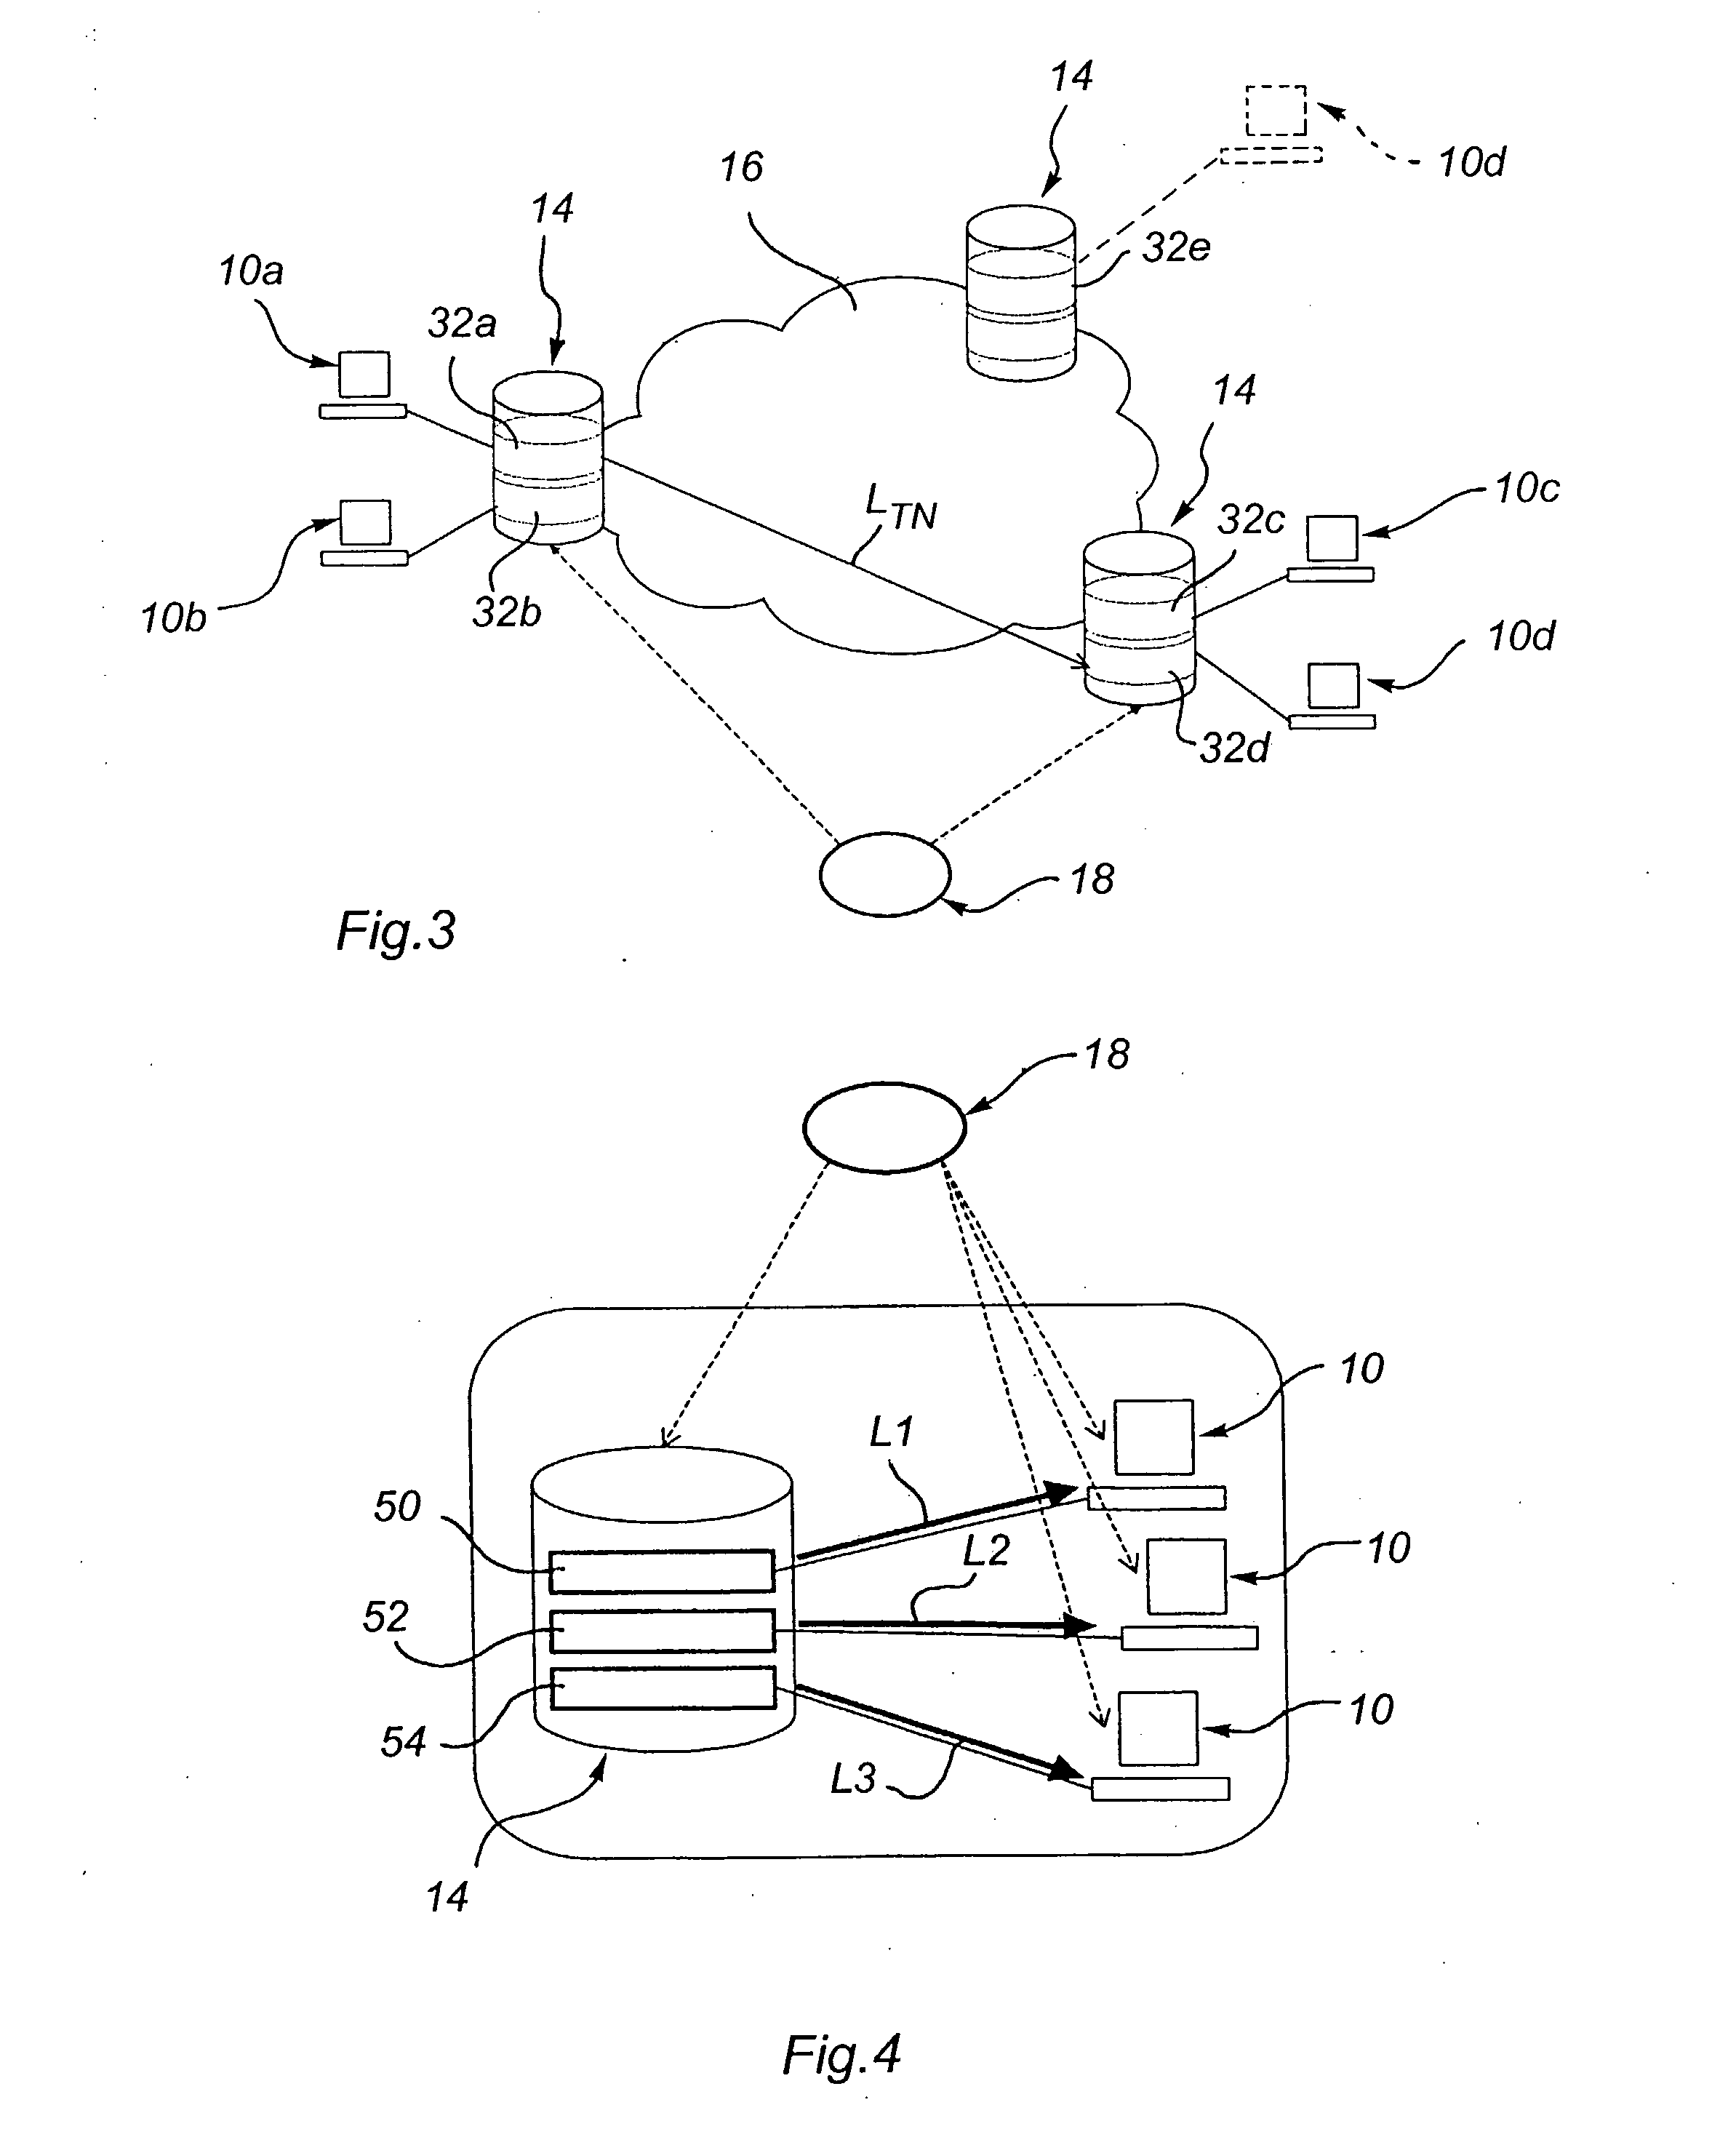 Method and System of Degital Content Sharing Among Users Over Communications Networks , Related Telecommunications Network Architecture and Computer Program Product Therefor